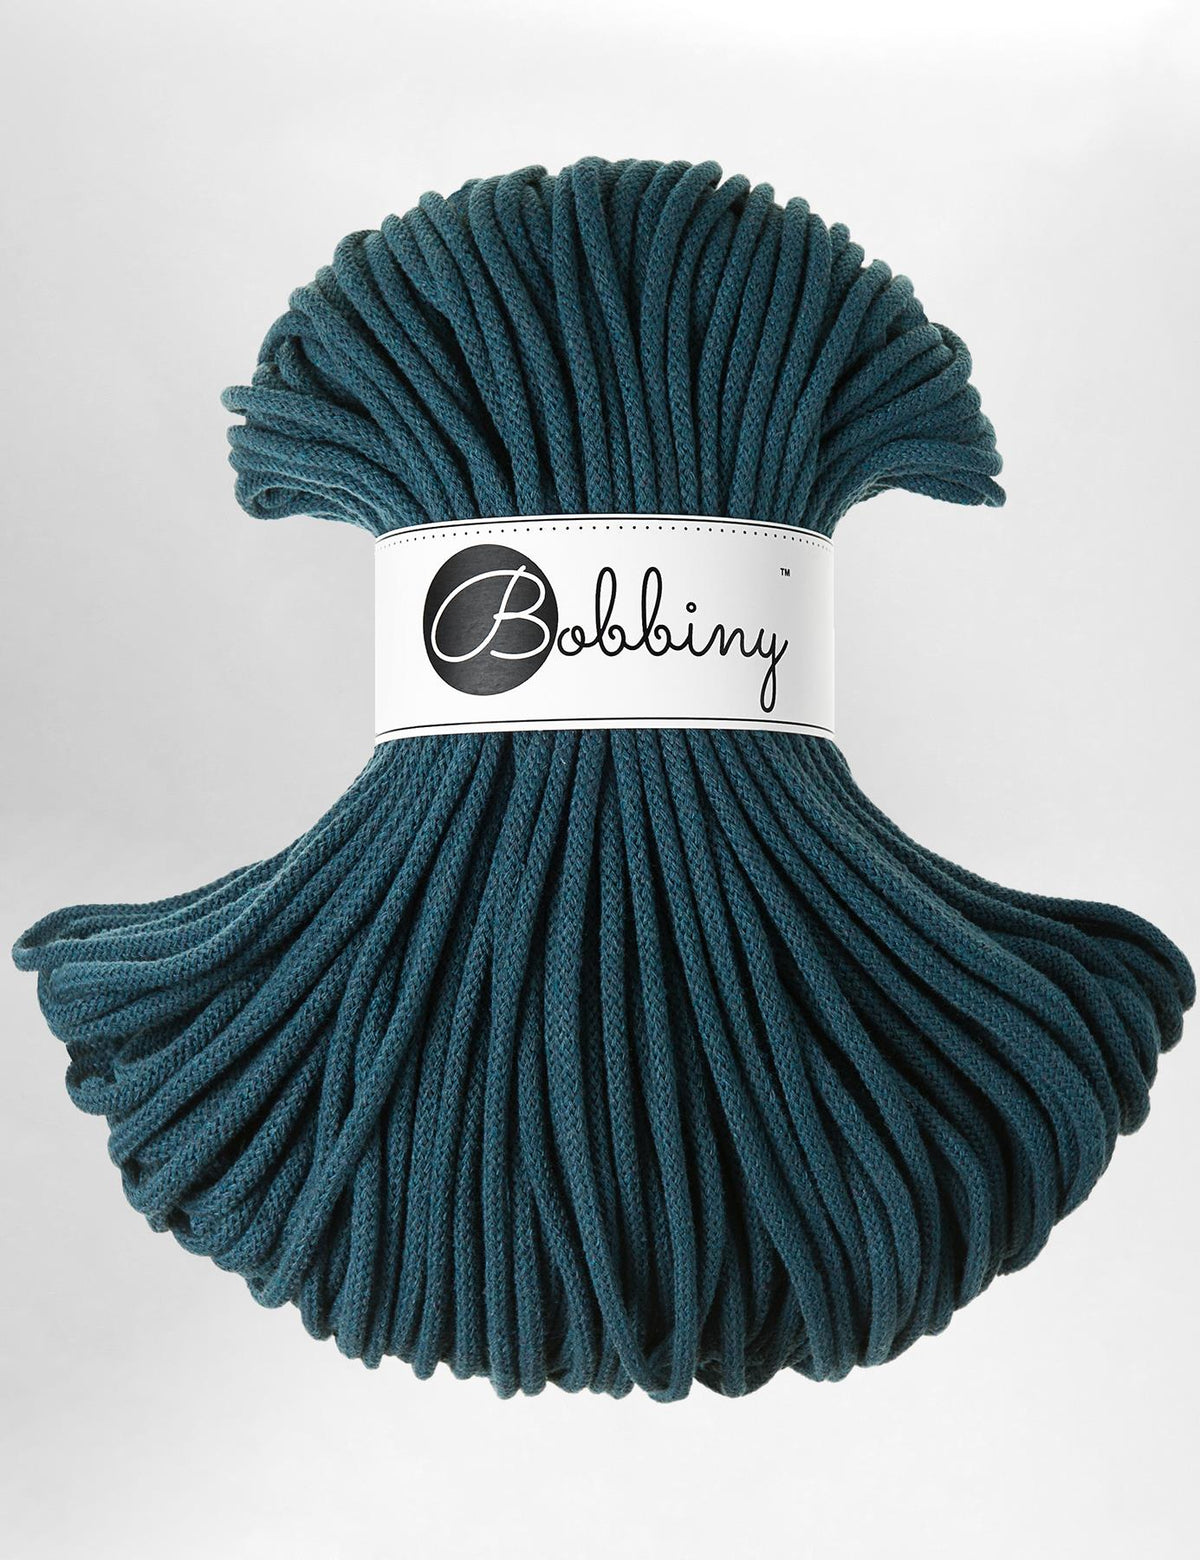 5mm Peacock blue recycled cotton macrame cord by Bobbiny (100m)